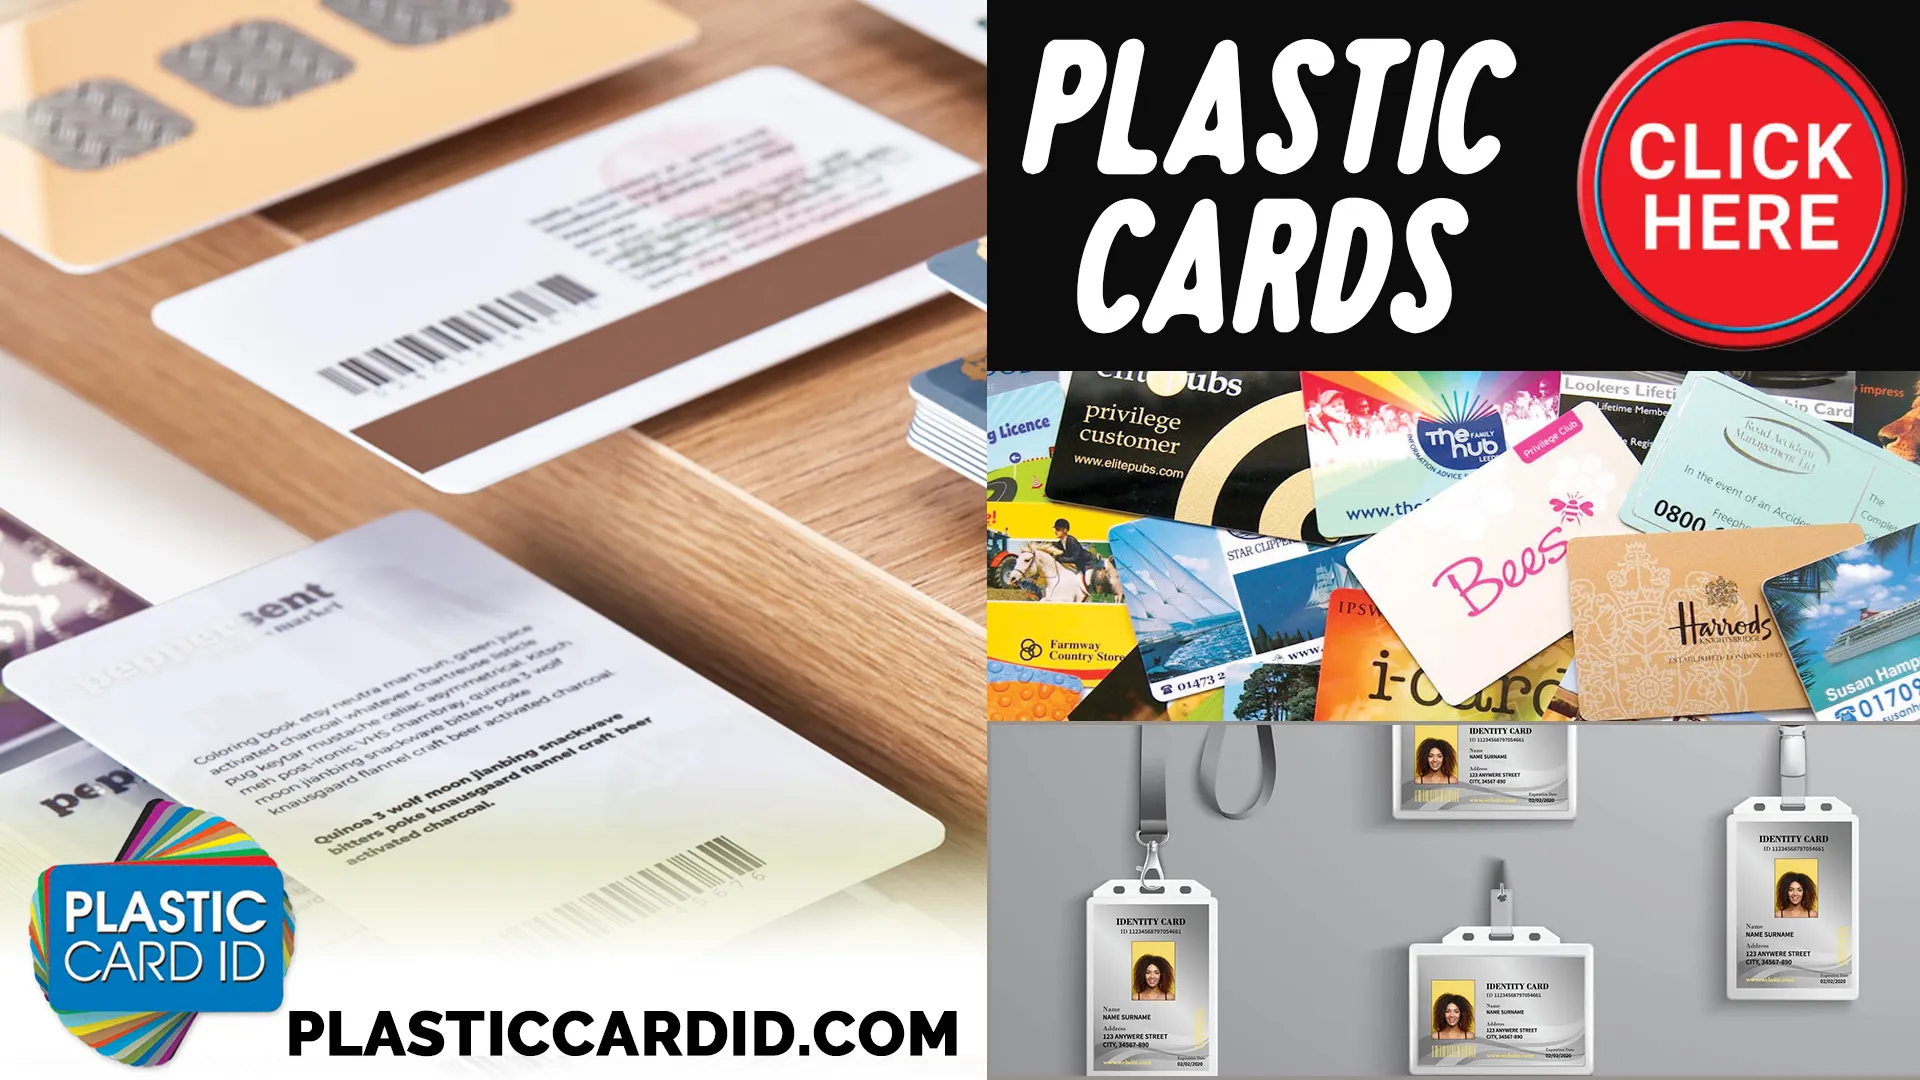 Welcome to Plastic Card ID




: Where Durability Intersects With Design